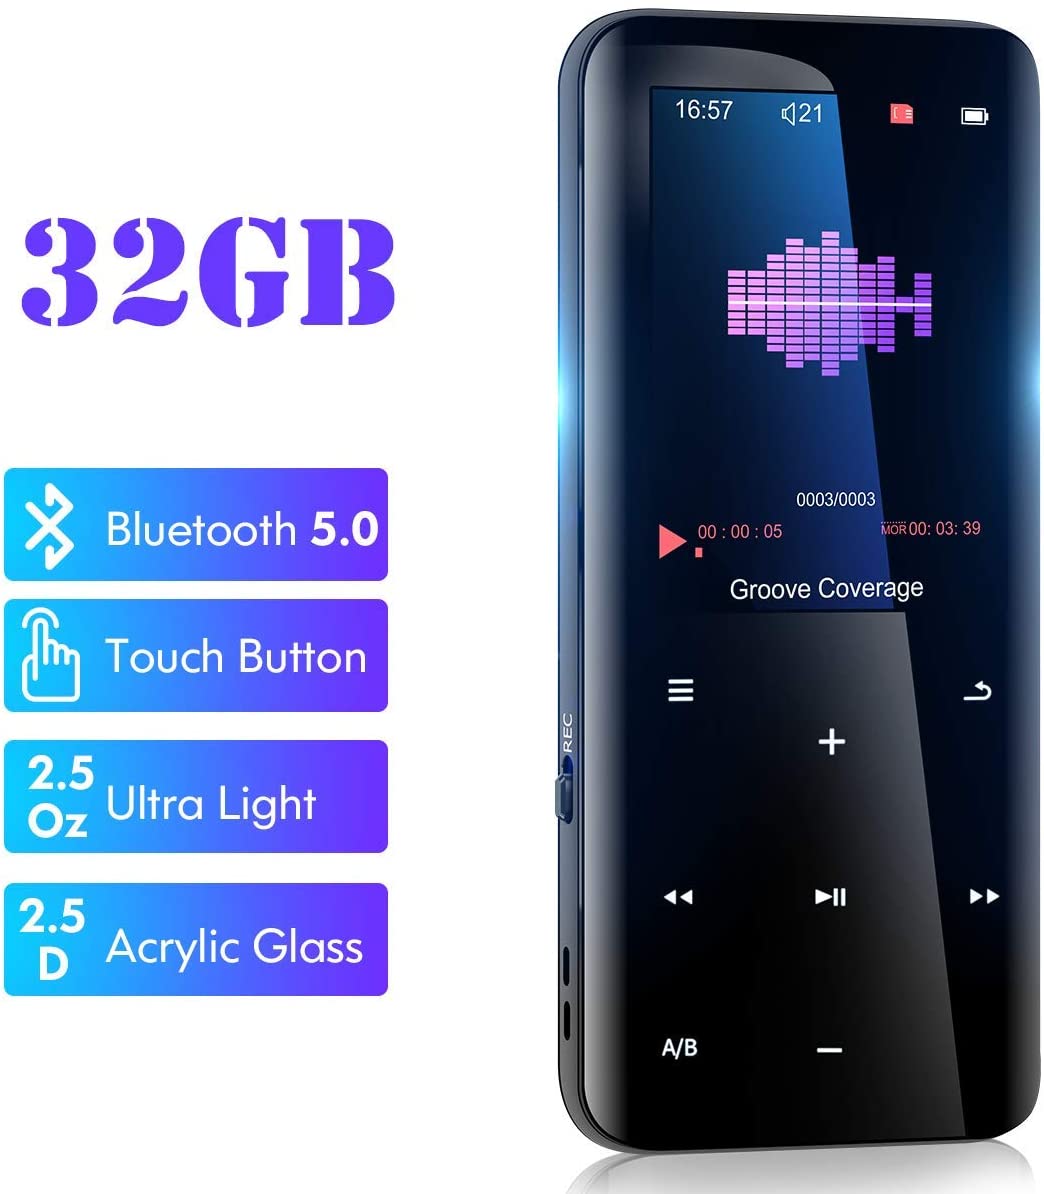 Telele 64GB Mp3 Player with Bluetooth 5.0 - Portable Digital Lossless Music MP3 MP4 Player with FM Radio HD Speaker